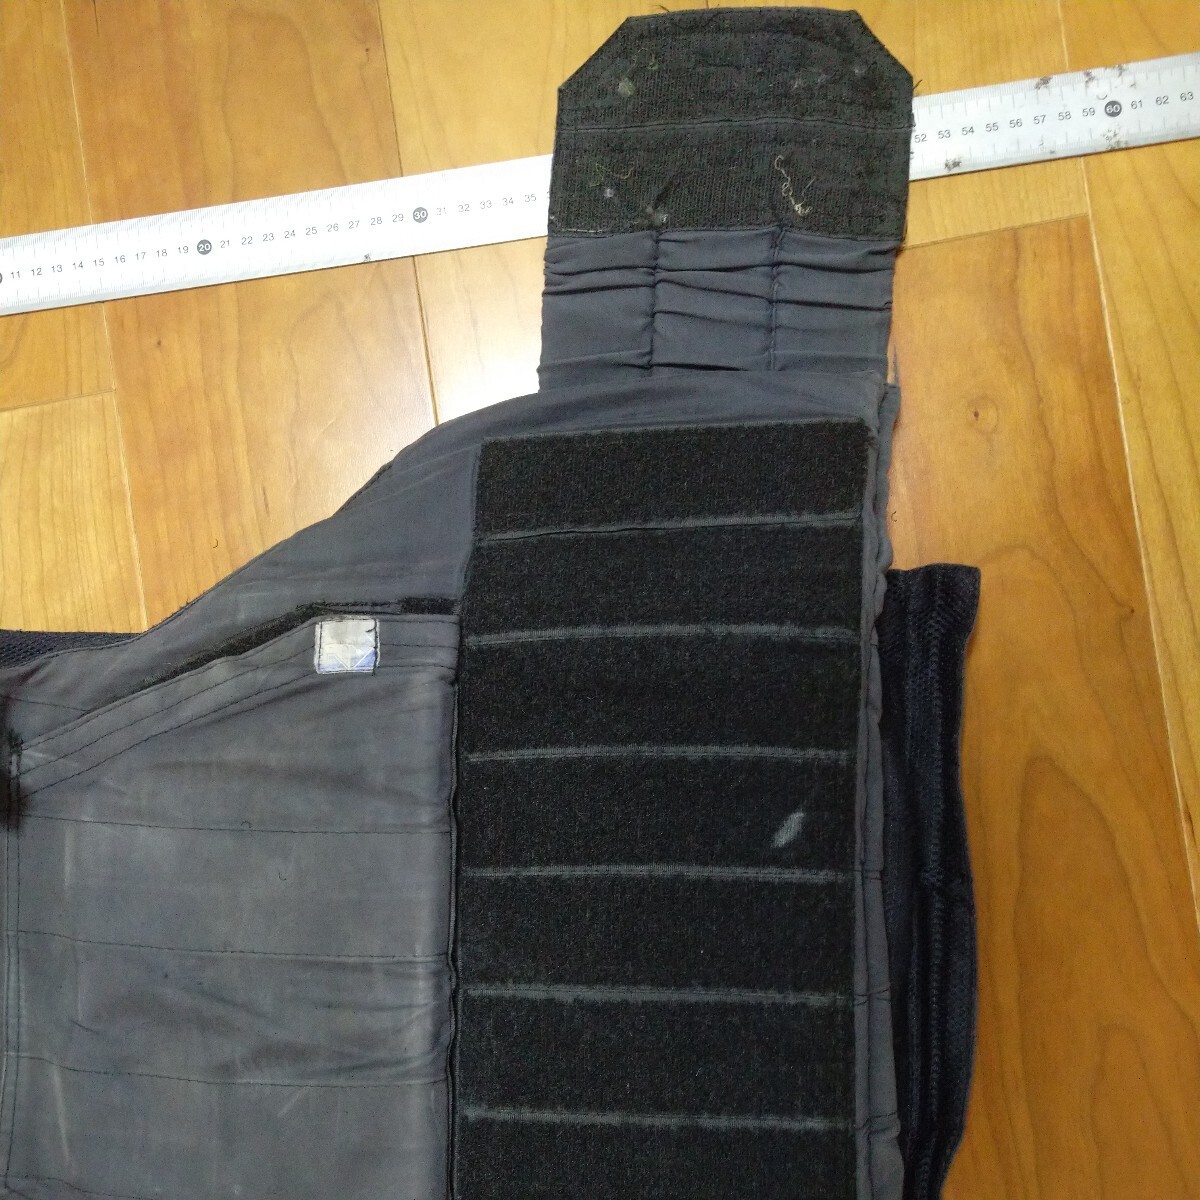 Fort company manufactured DEFENDER2 LOWPROFILE body armor - cover the truth thing Russia FSB